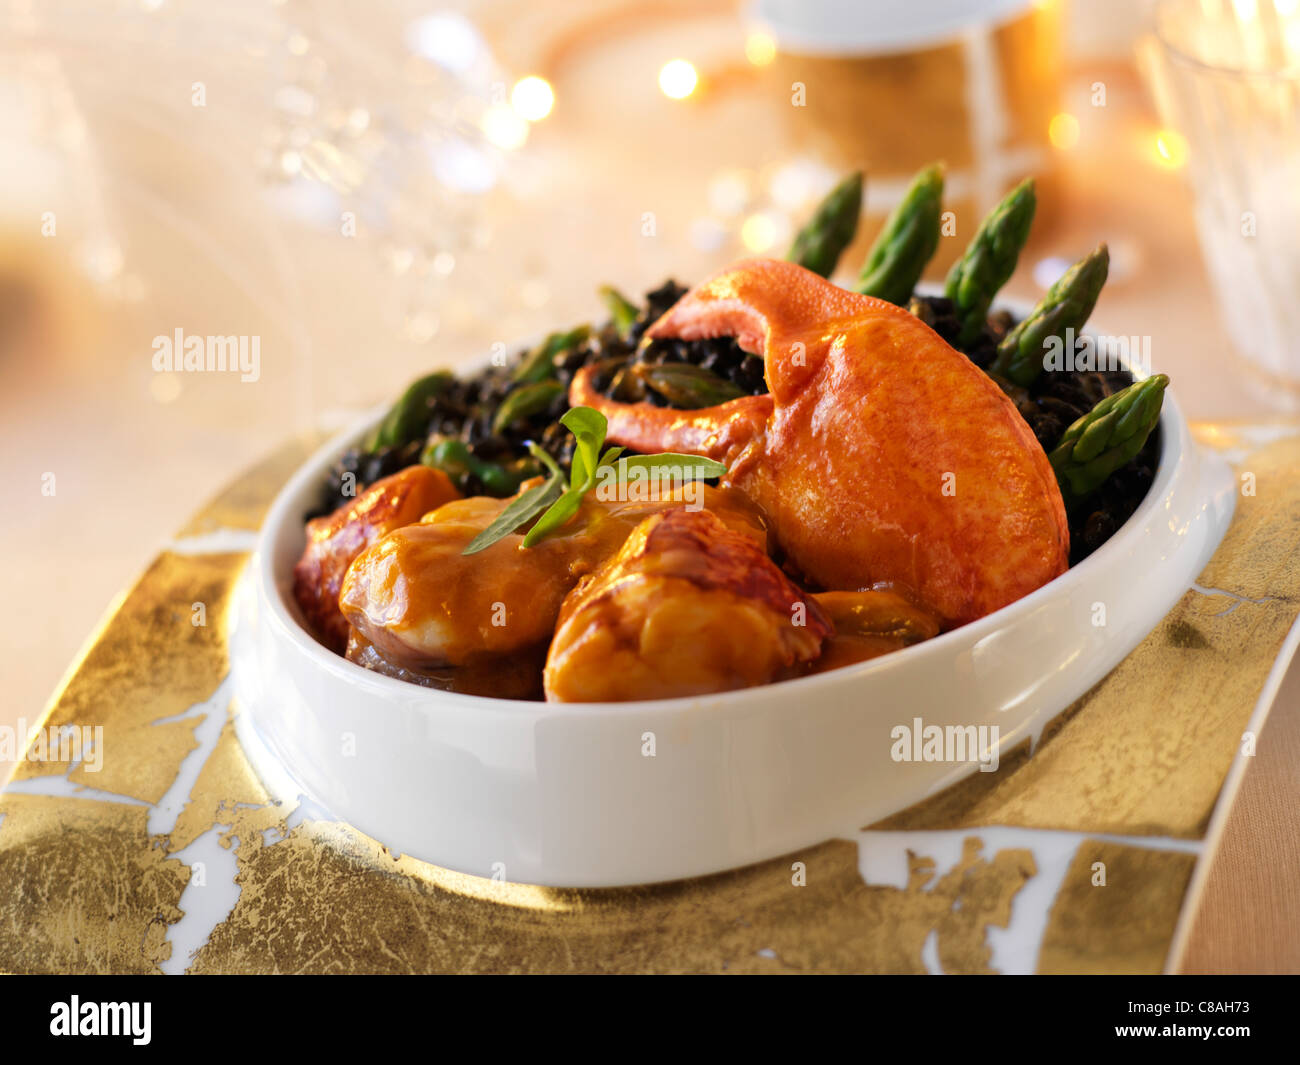 Lobster and monkfish duo with green asparagus Stock Photo